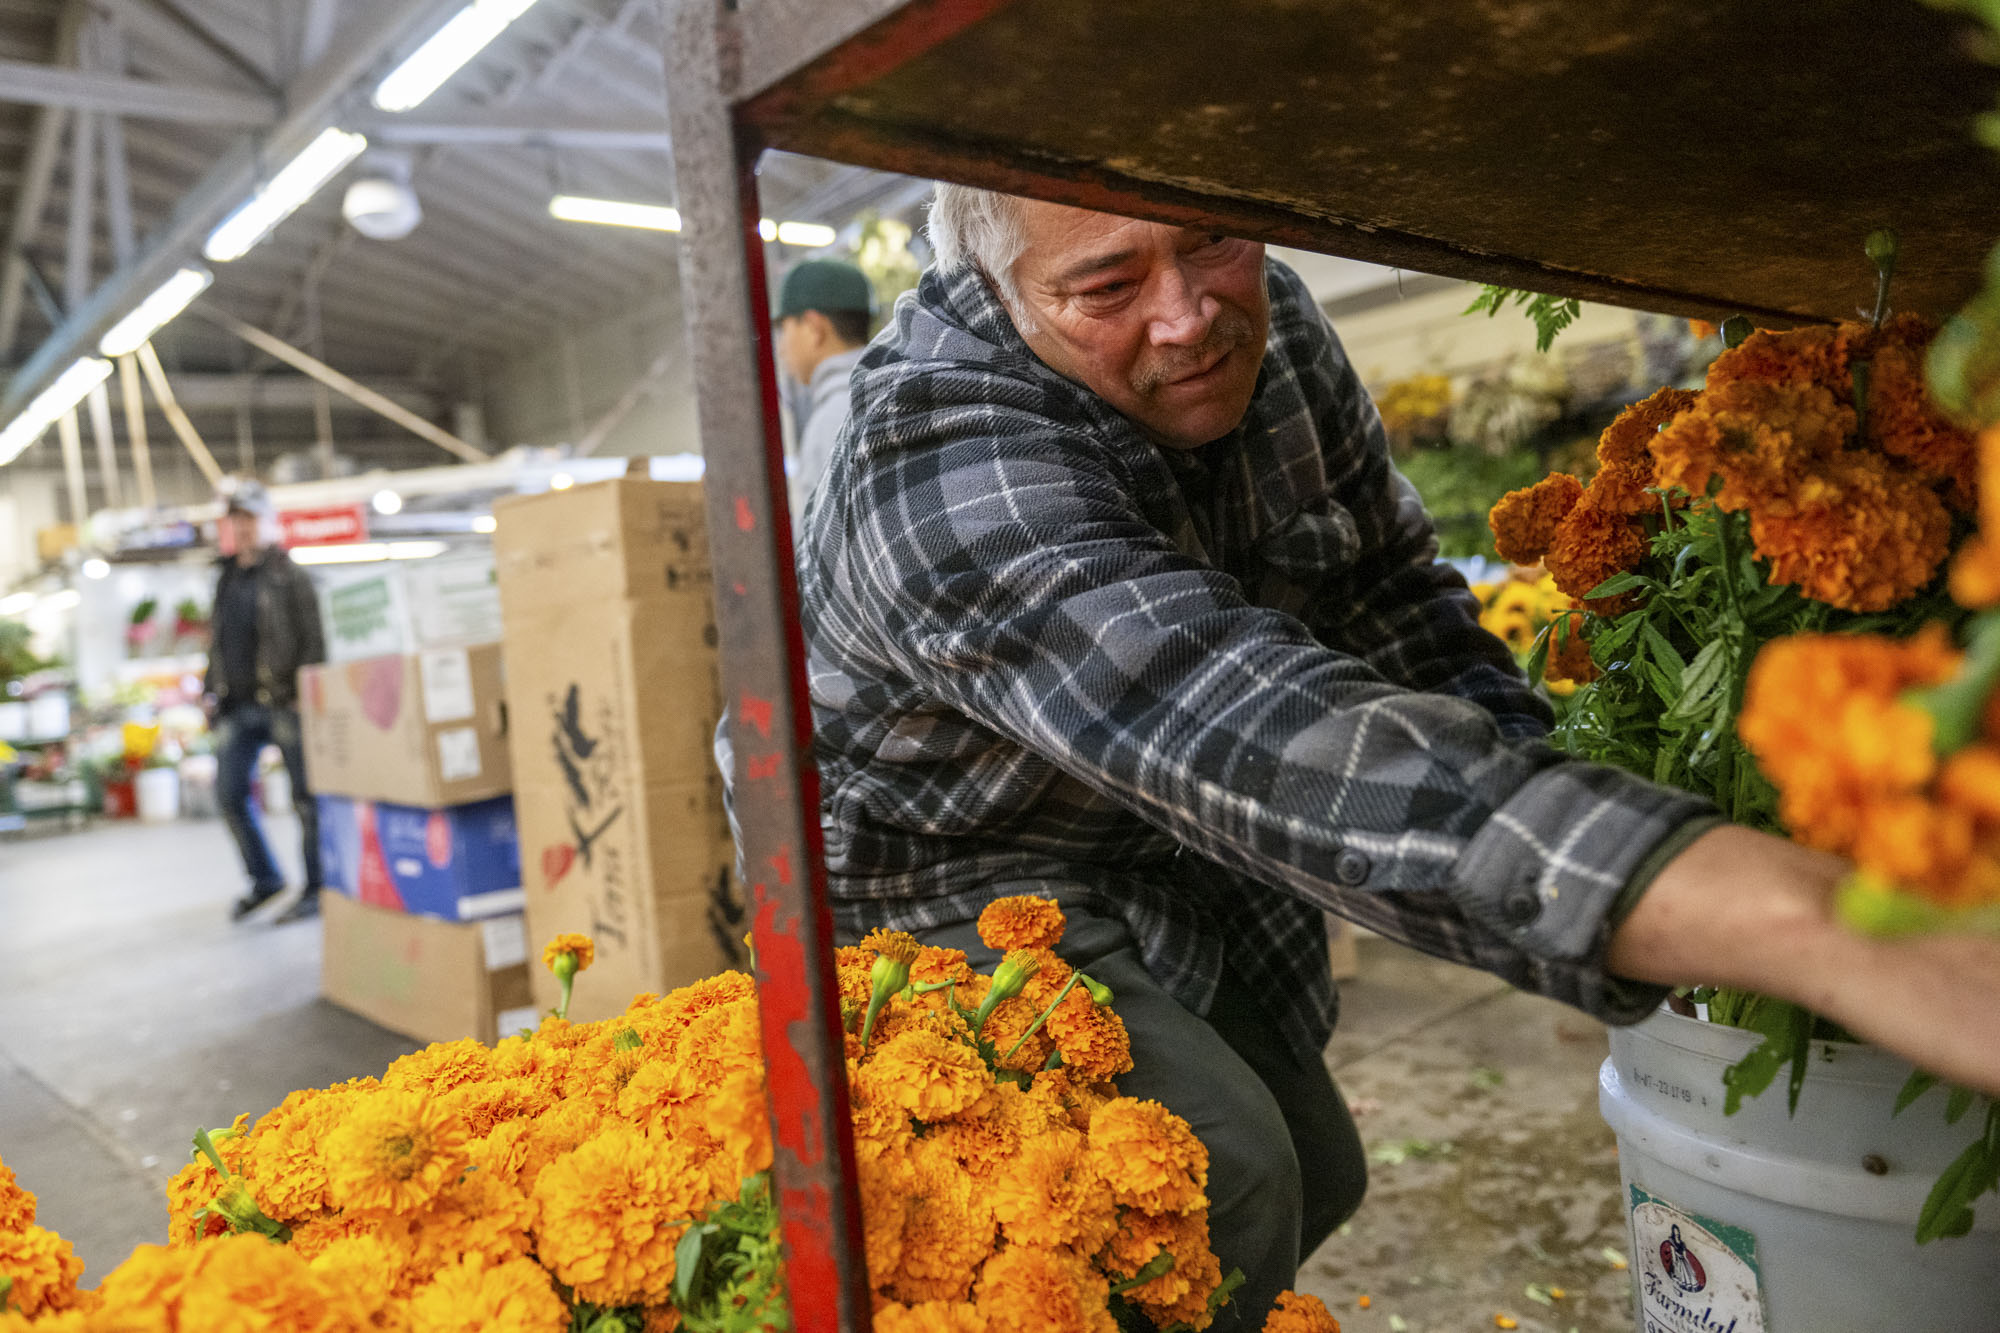 A person reaches for something beween bouquets of marigolds in a large indoor setting.